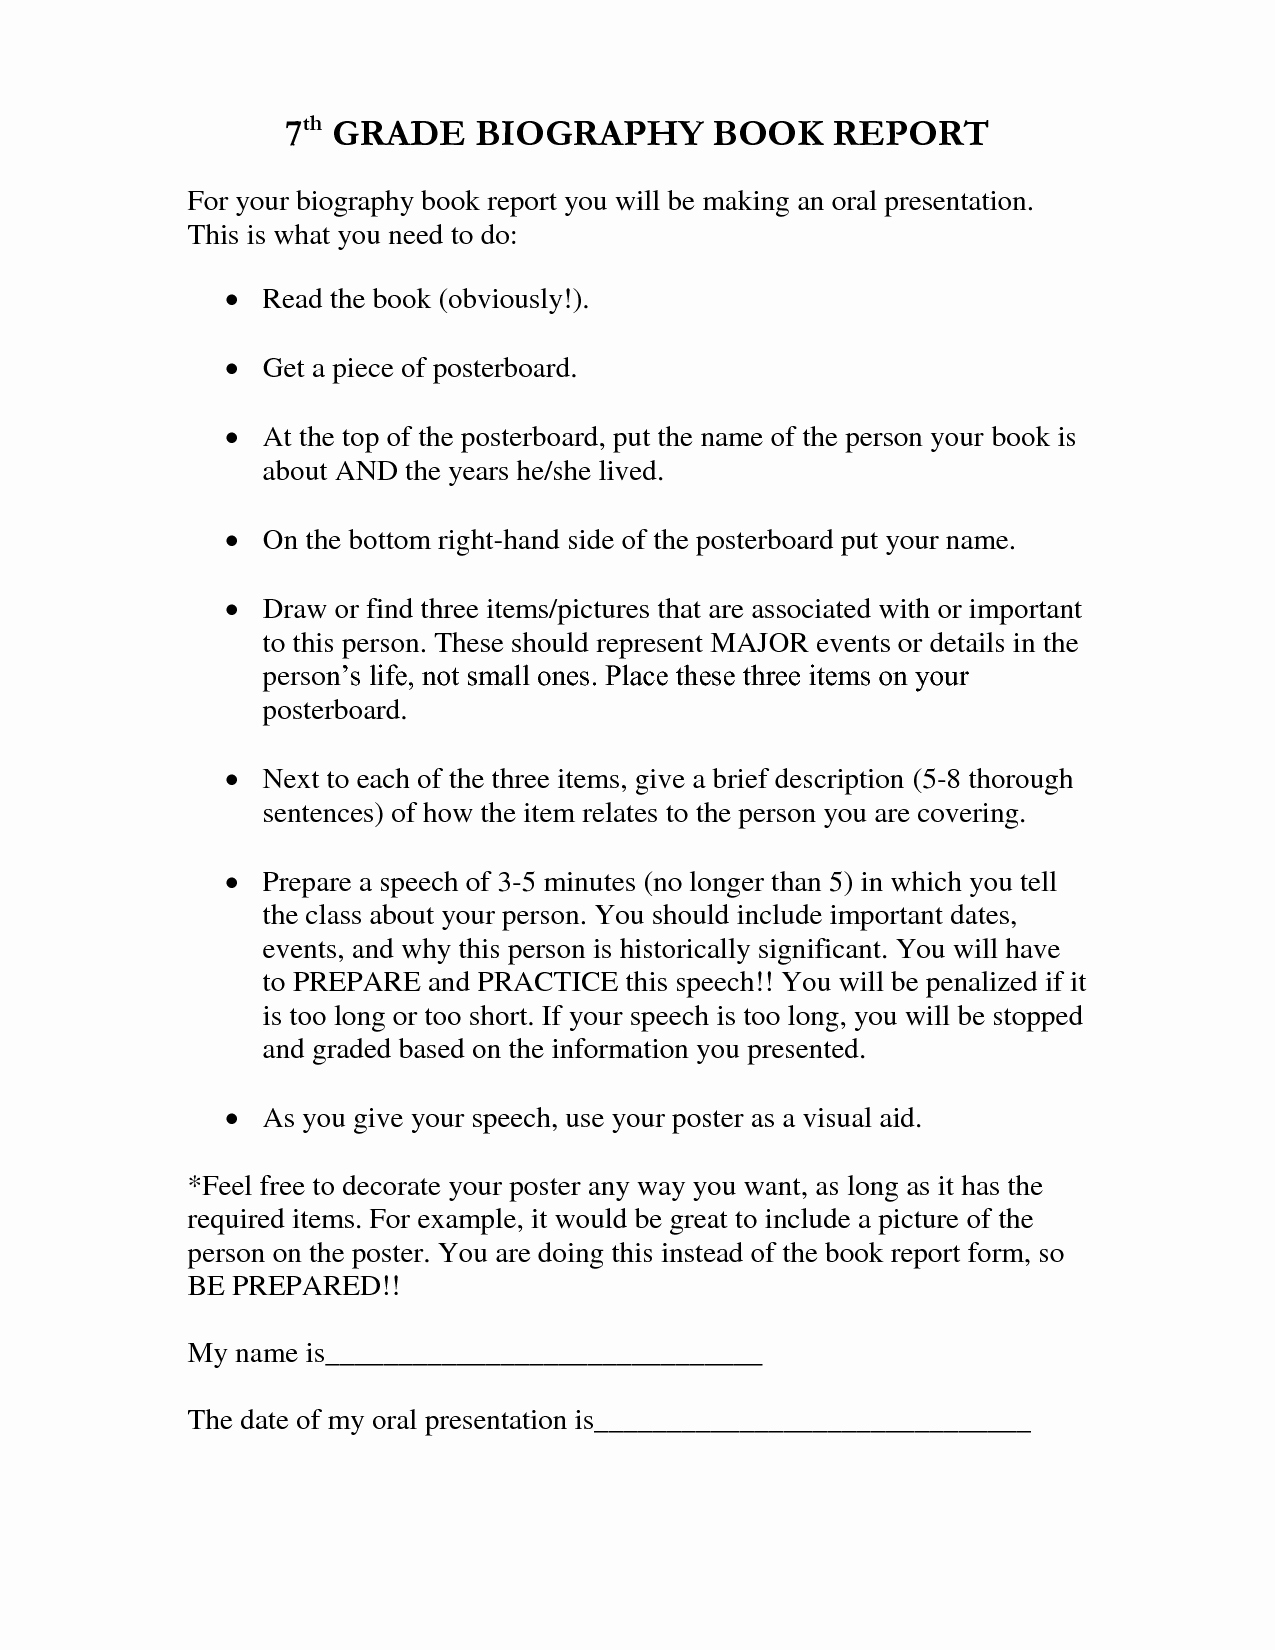 Biography Book Report Template Luxury 5th Grade President Report Outline Bamboodownunder